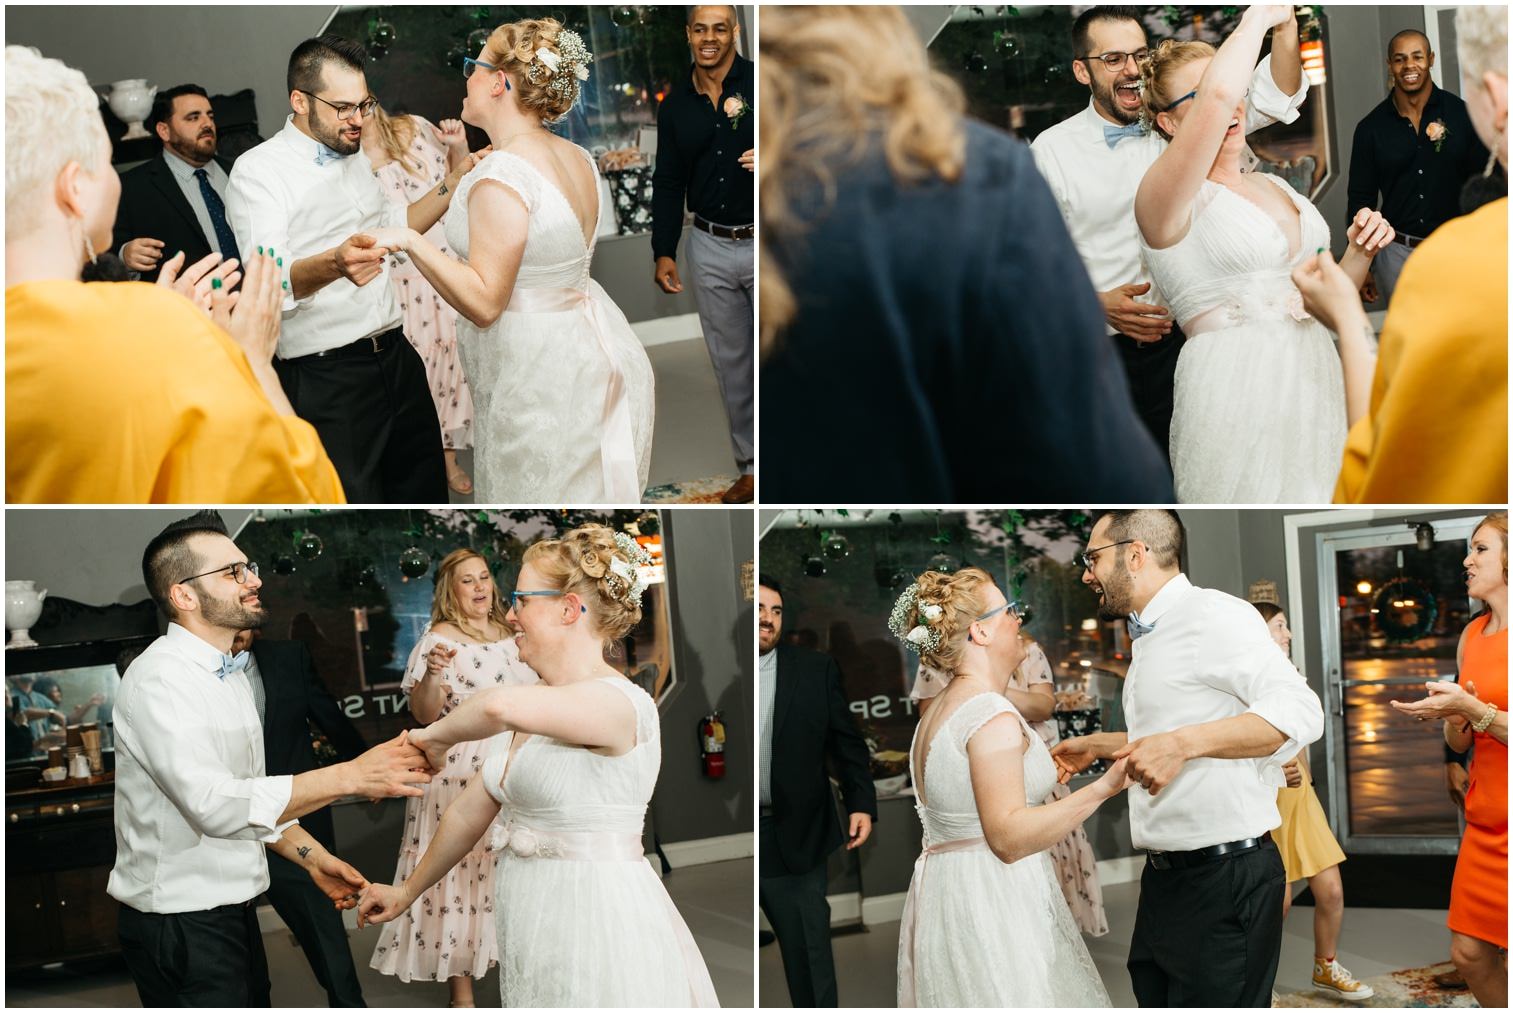 adam lowe photography, columbus, ohio, wedding, style, love, bride and groom, bleu & fig, midwest photo, 